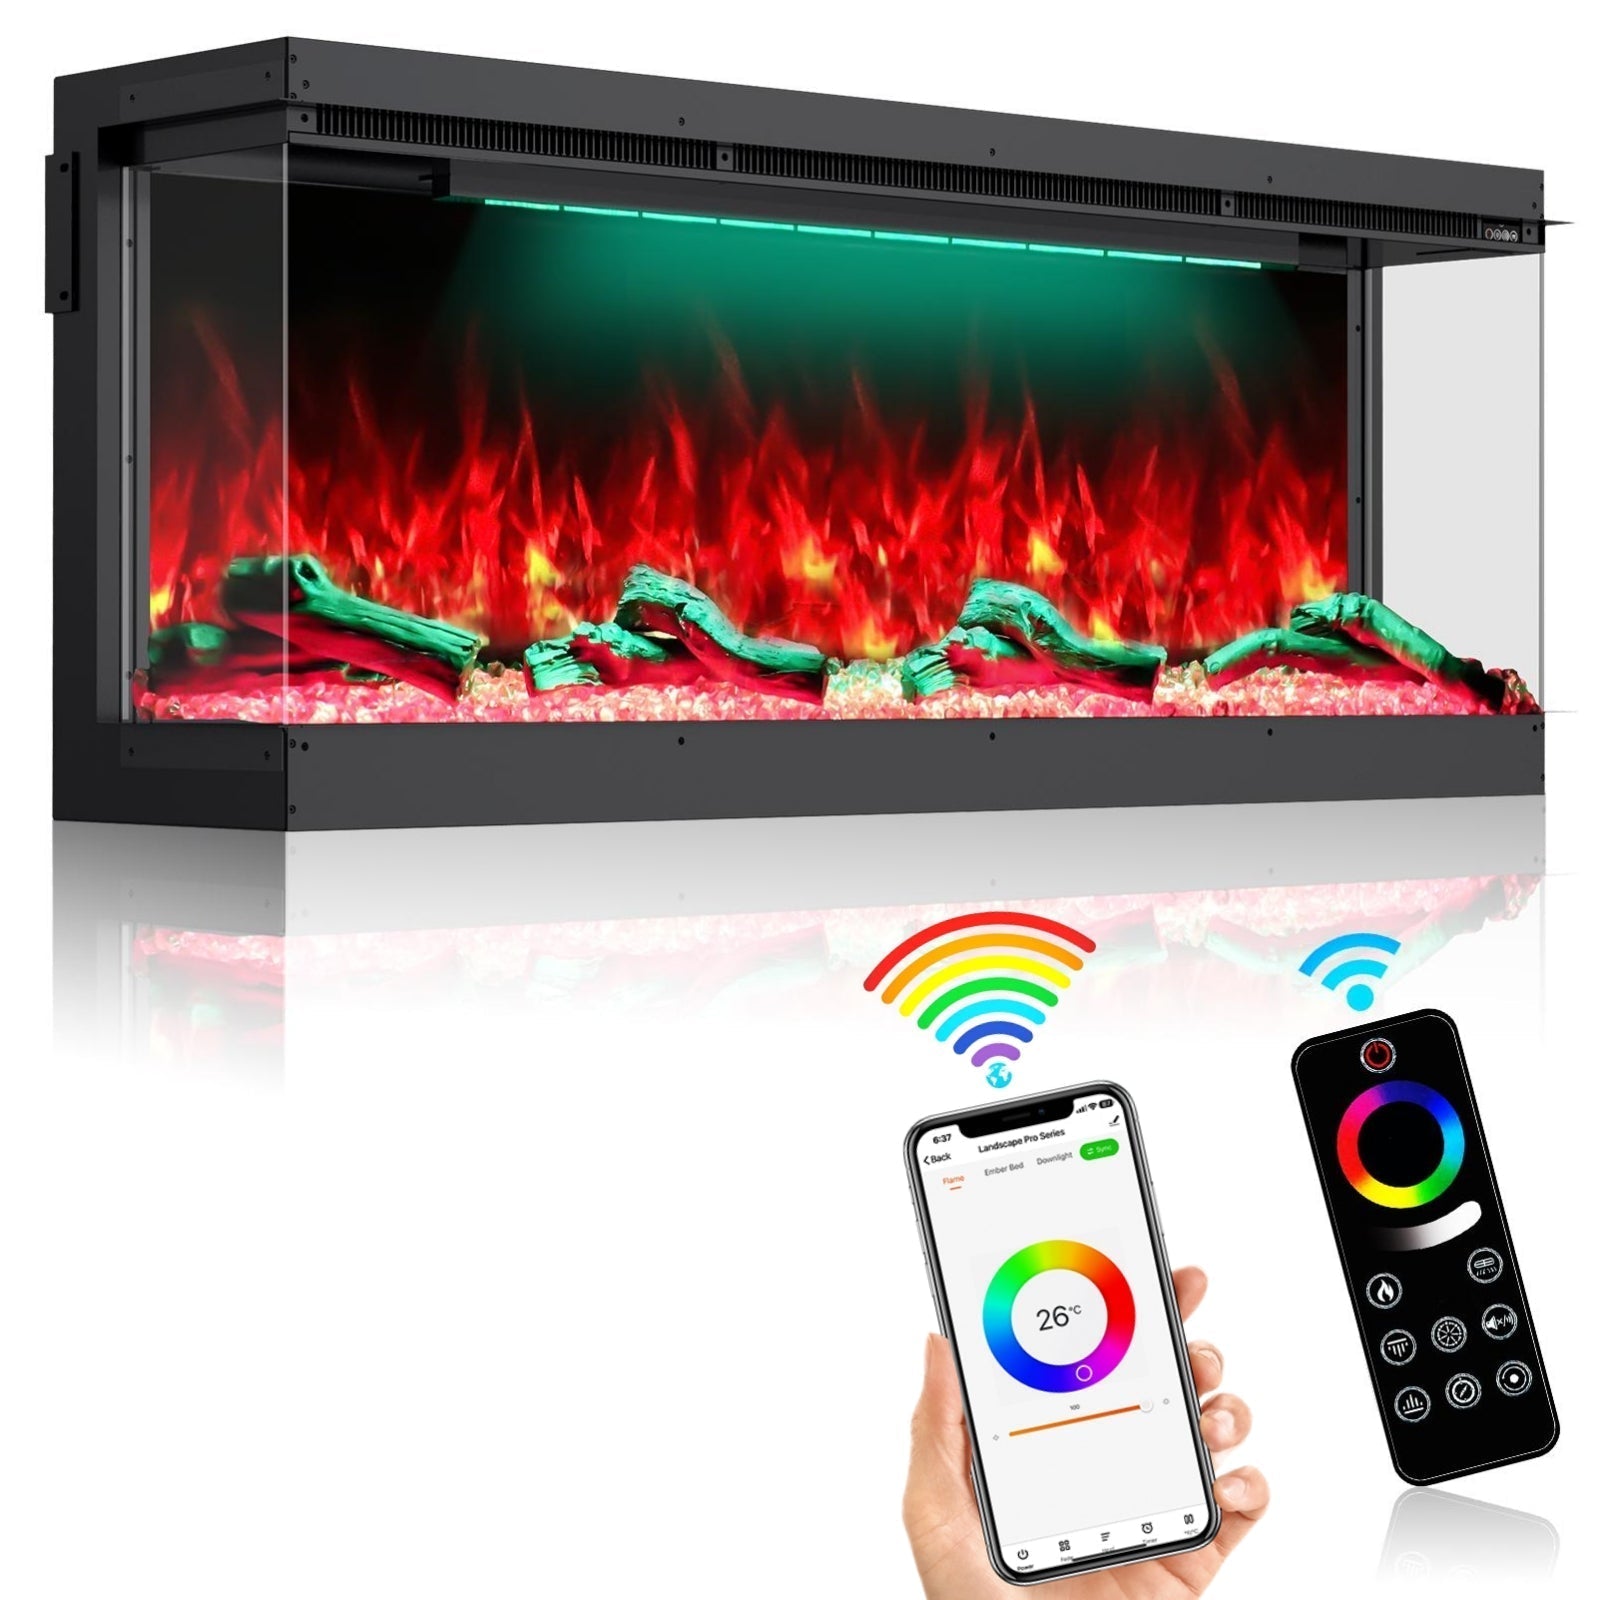 Recessed 3-Sided Electric Fireplace, 50-inch Smart WiFi 251 Flame Colors Combination Inserts Eletric Fire Place Heater for Living Room Indoor Use with Remote Control, Log & Crystals, Black